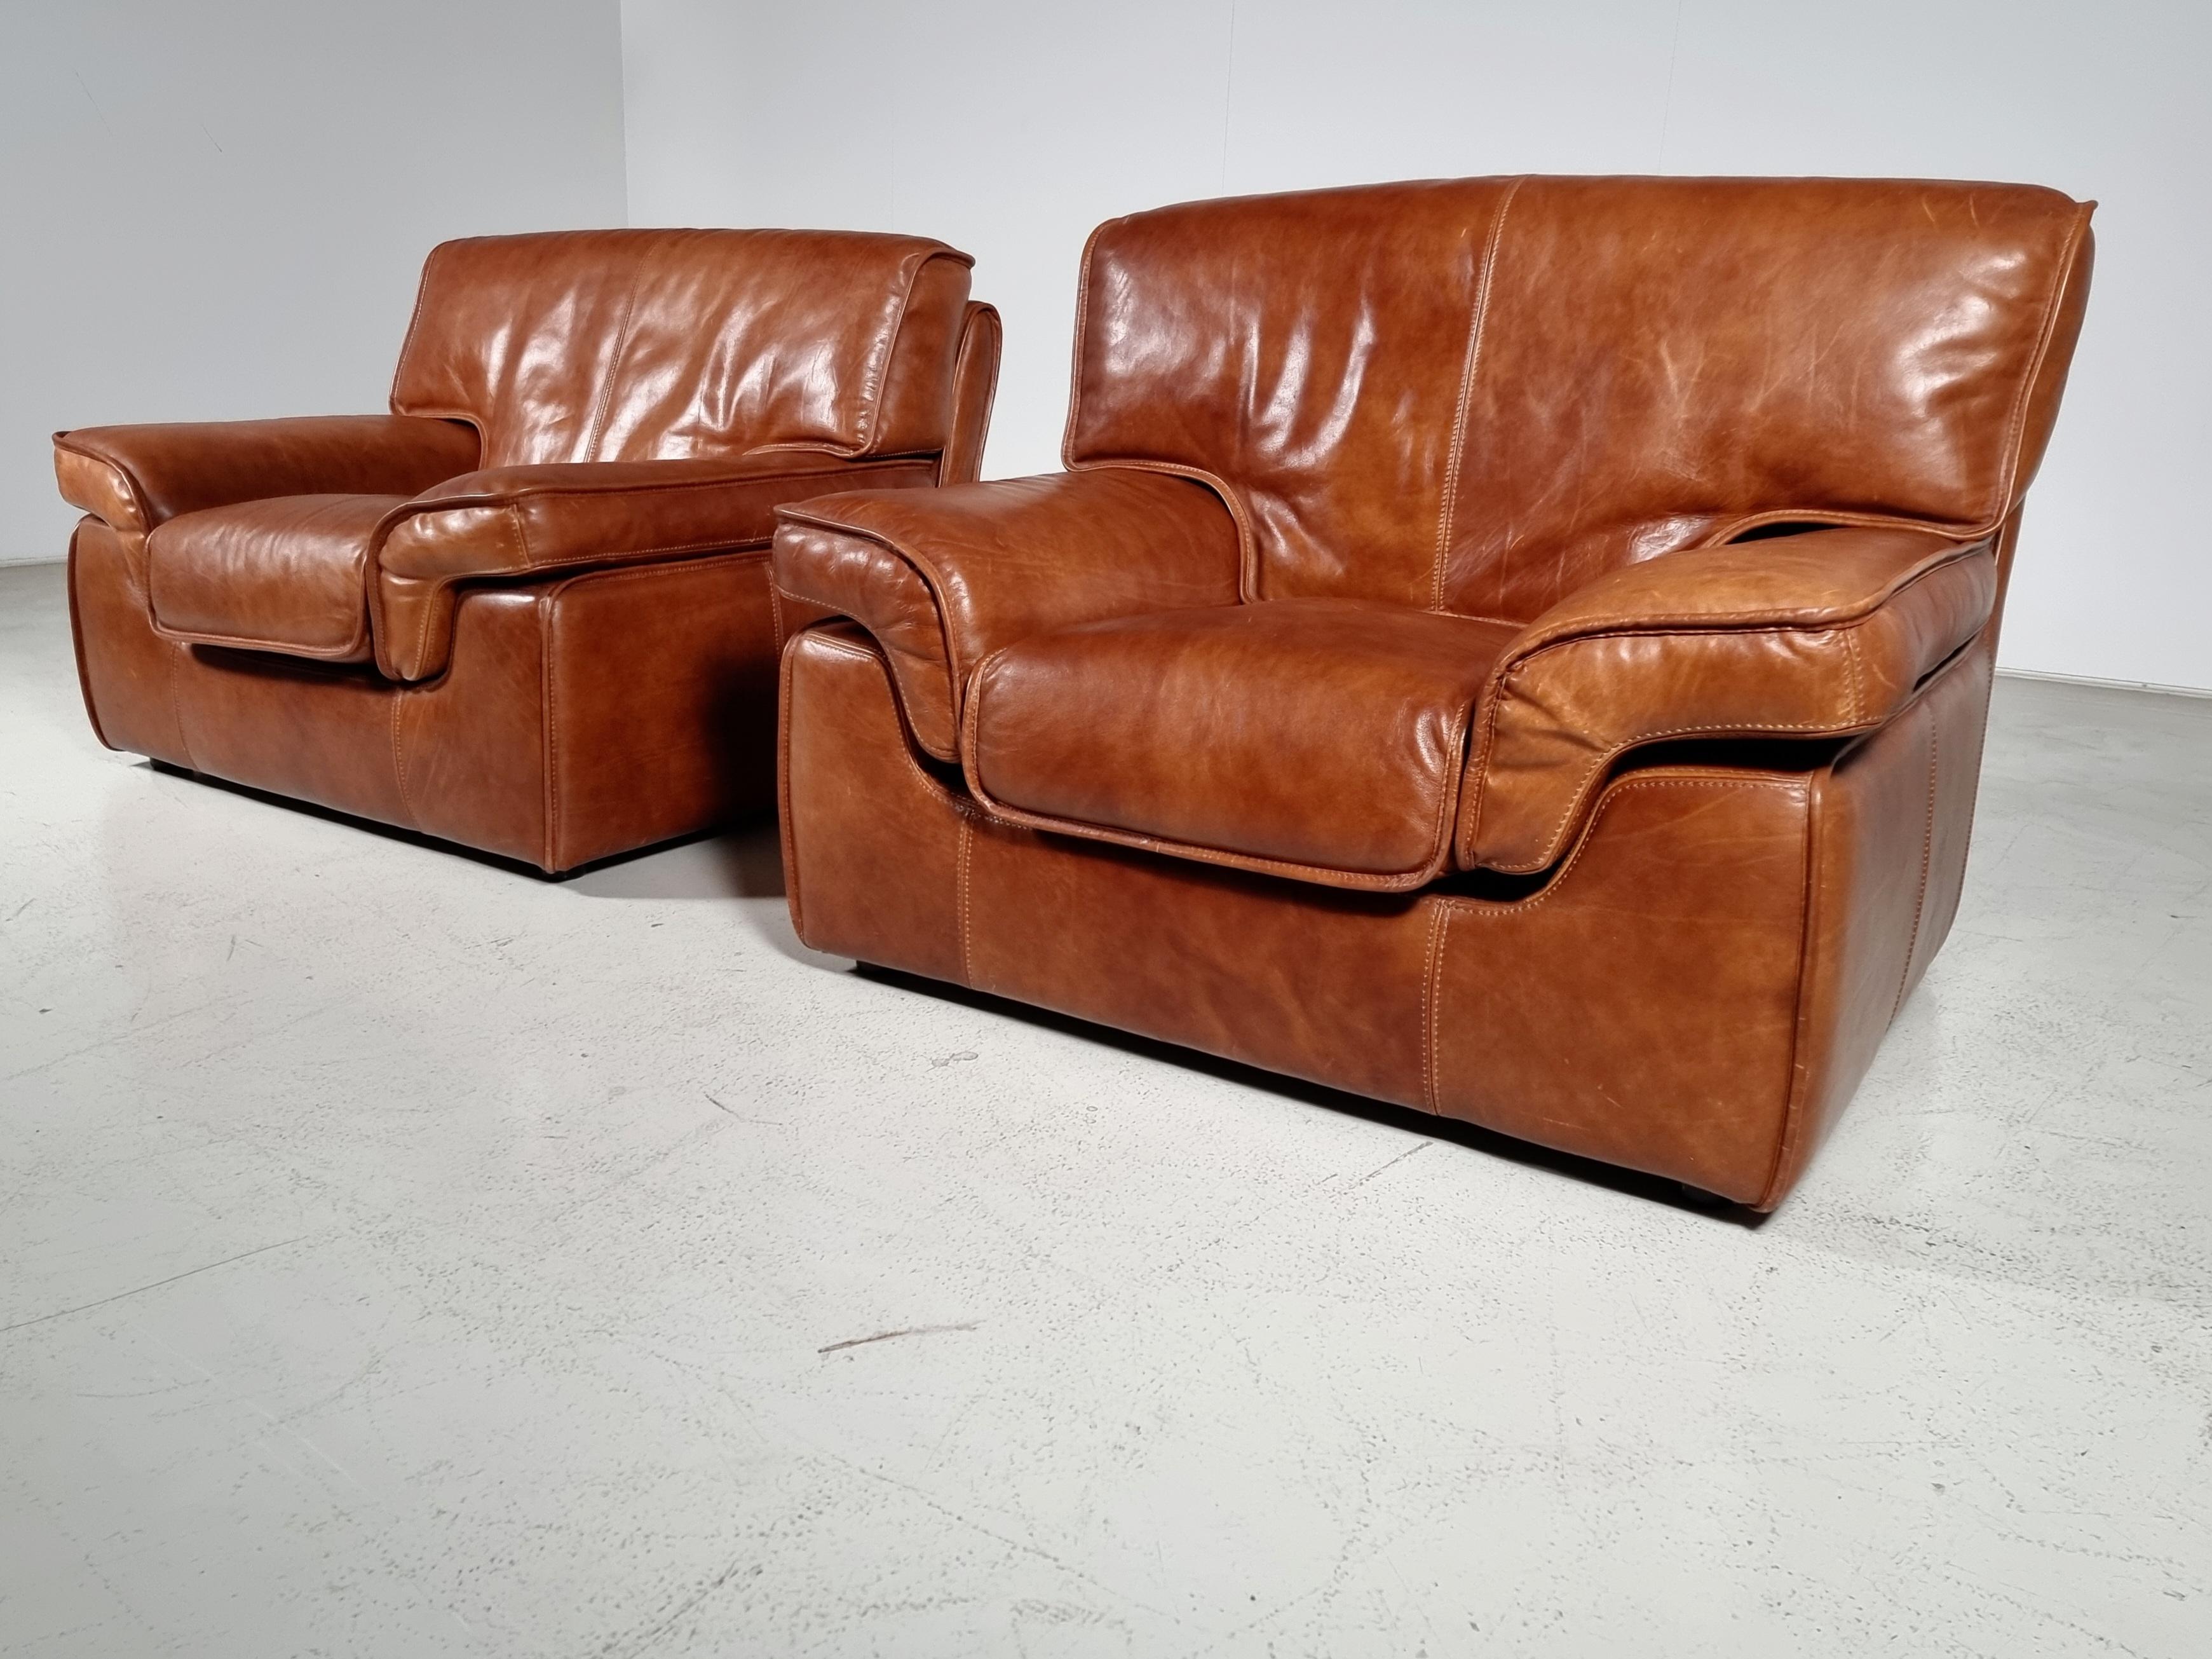 Beautiful set of 2 buffalo leather lounge / easy / club chairs in cognac leather with same color piping’s, Italy, 1970s. Comfortable seat with stunning detailing and great craftsmanship. The leather shows rich and beautiful patina.

